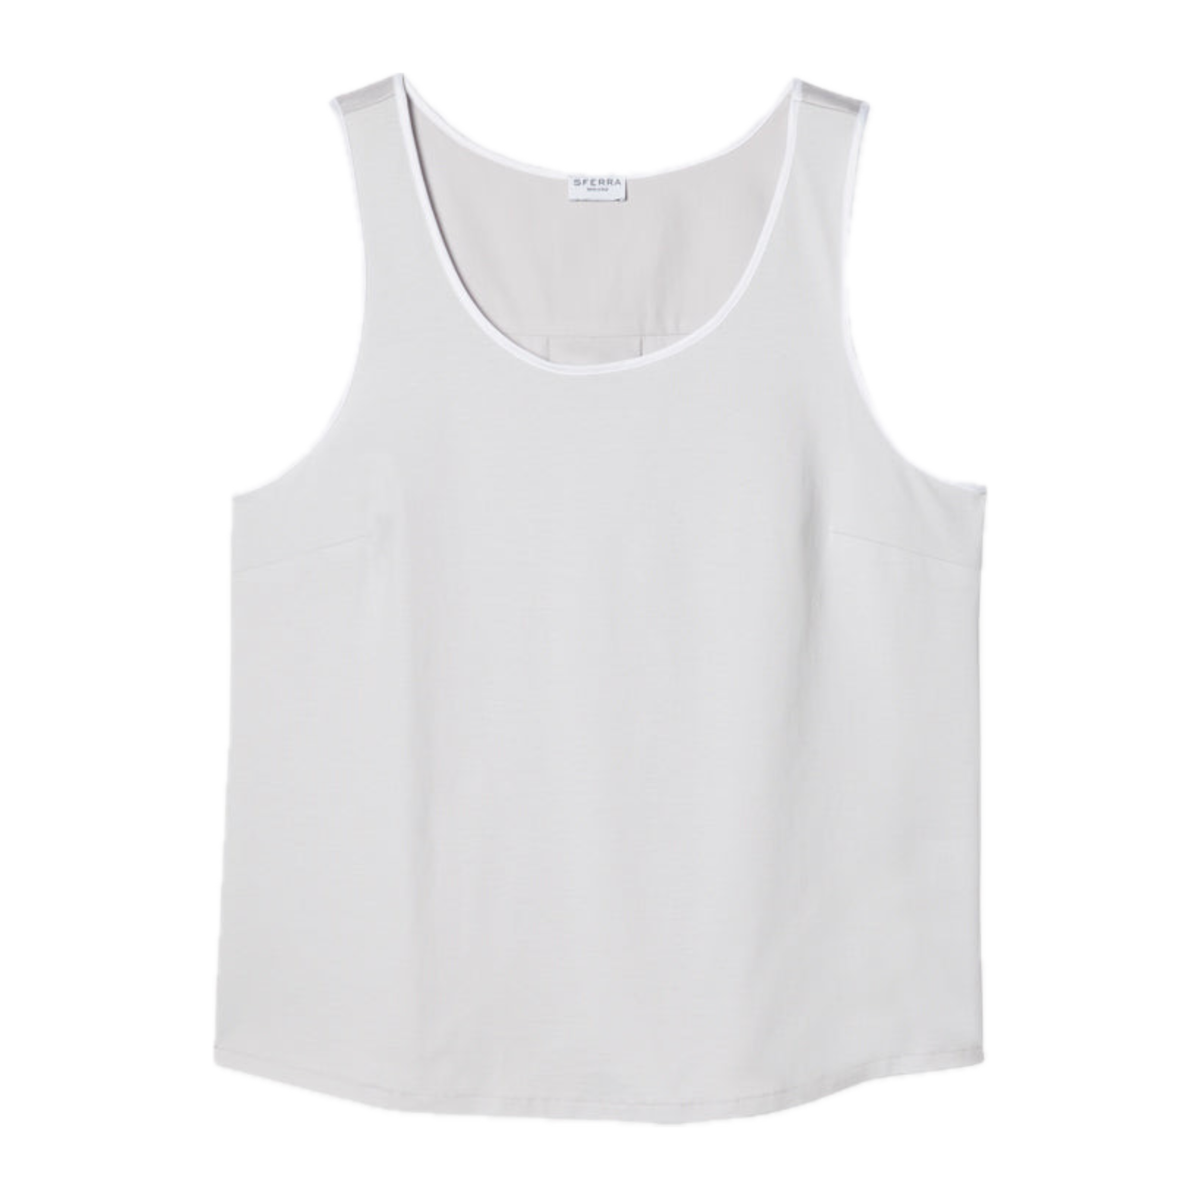 Tin Sferra Caricia Swing Tank Top against a white background